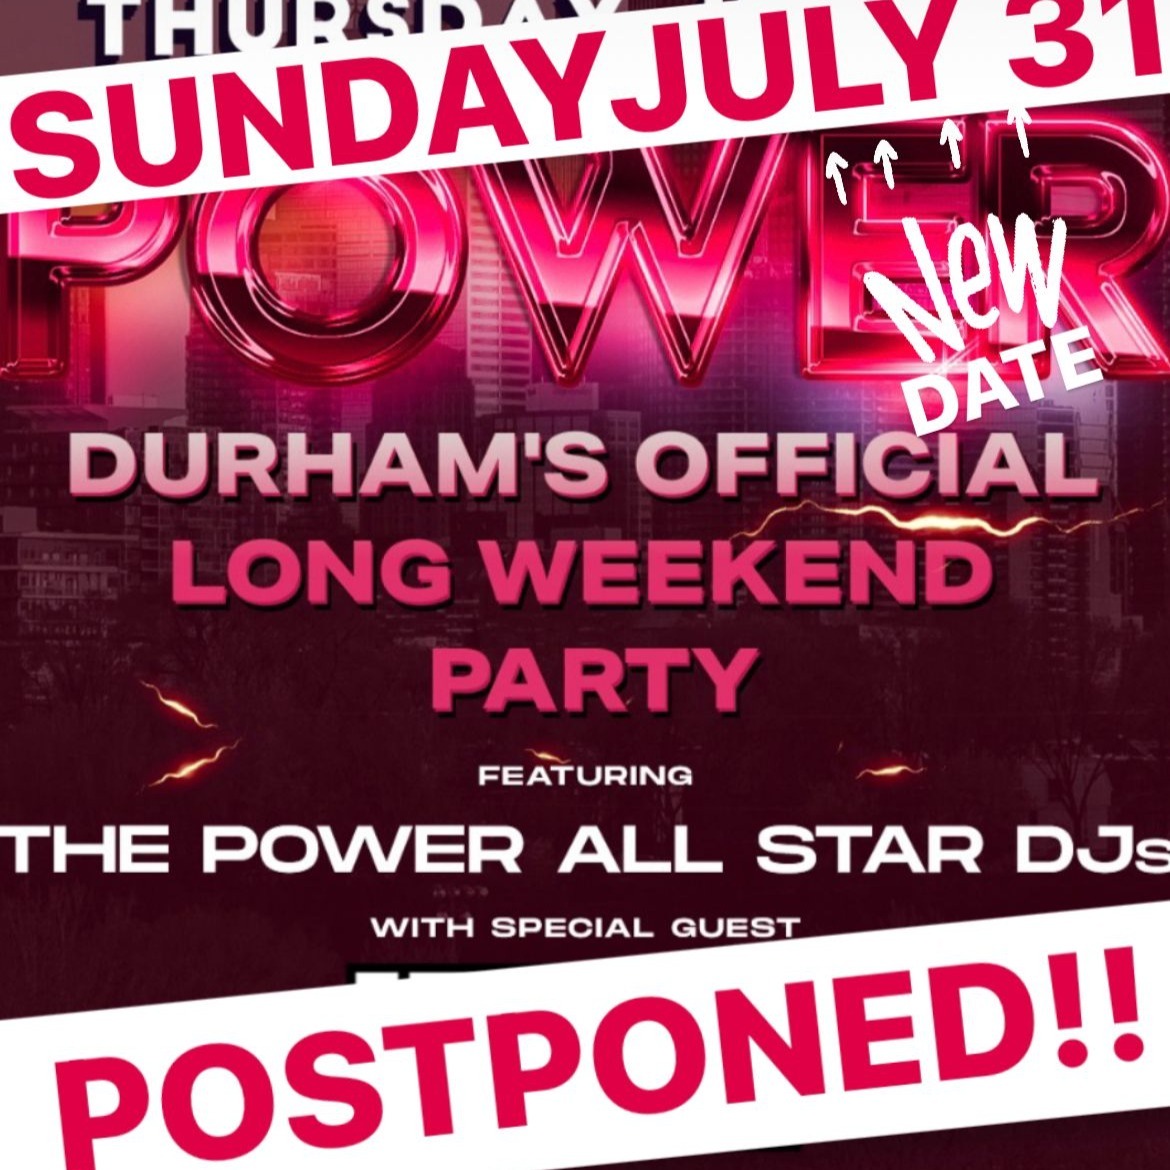 POWER - DURHAMS OFFICIAL LONG WEEKEND PARTY - THURSDAY JUNE 30